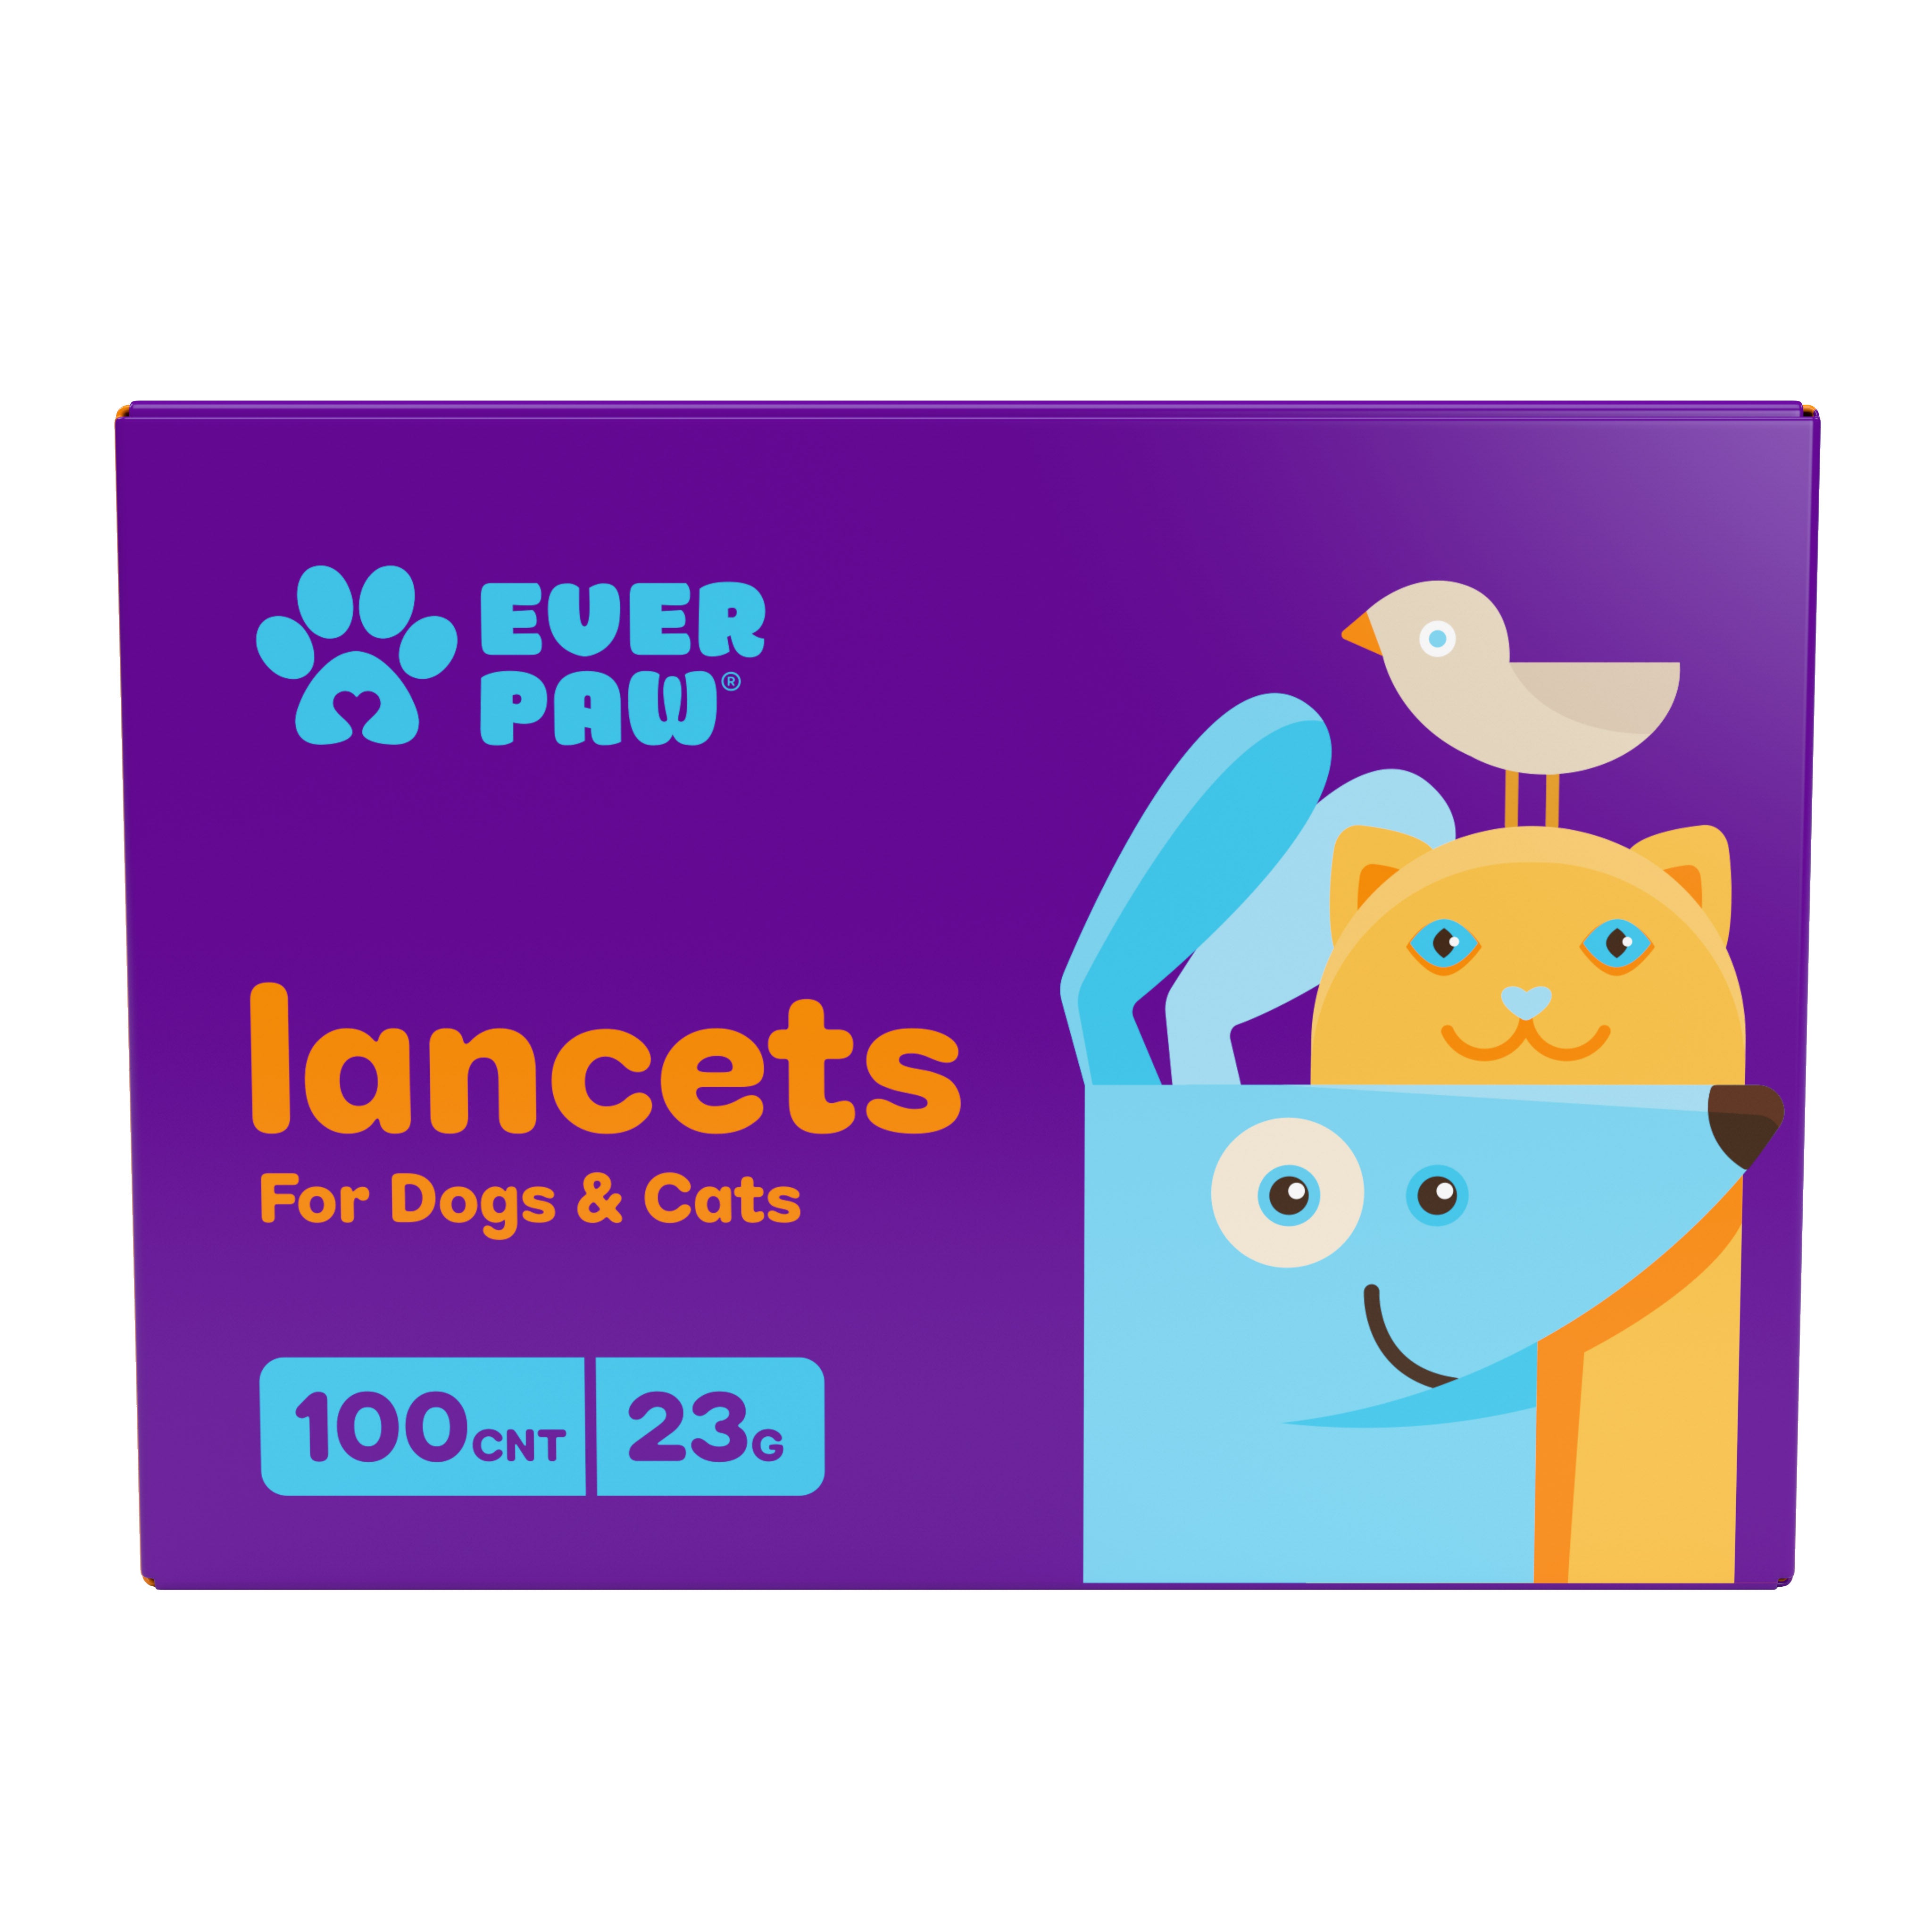 EverPaw Twist Top 23g Lancets, 100 Count | Ultra Thick & Long Needle for Dogs & Cats